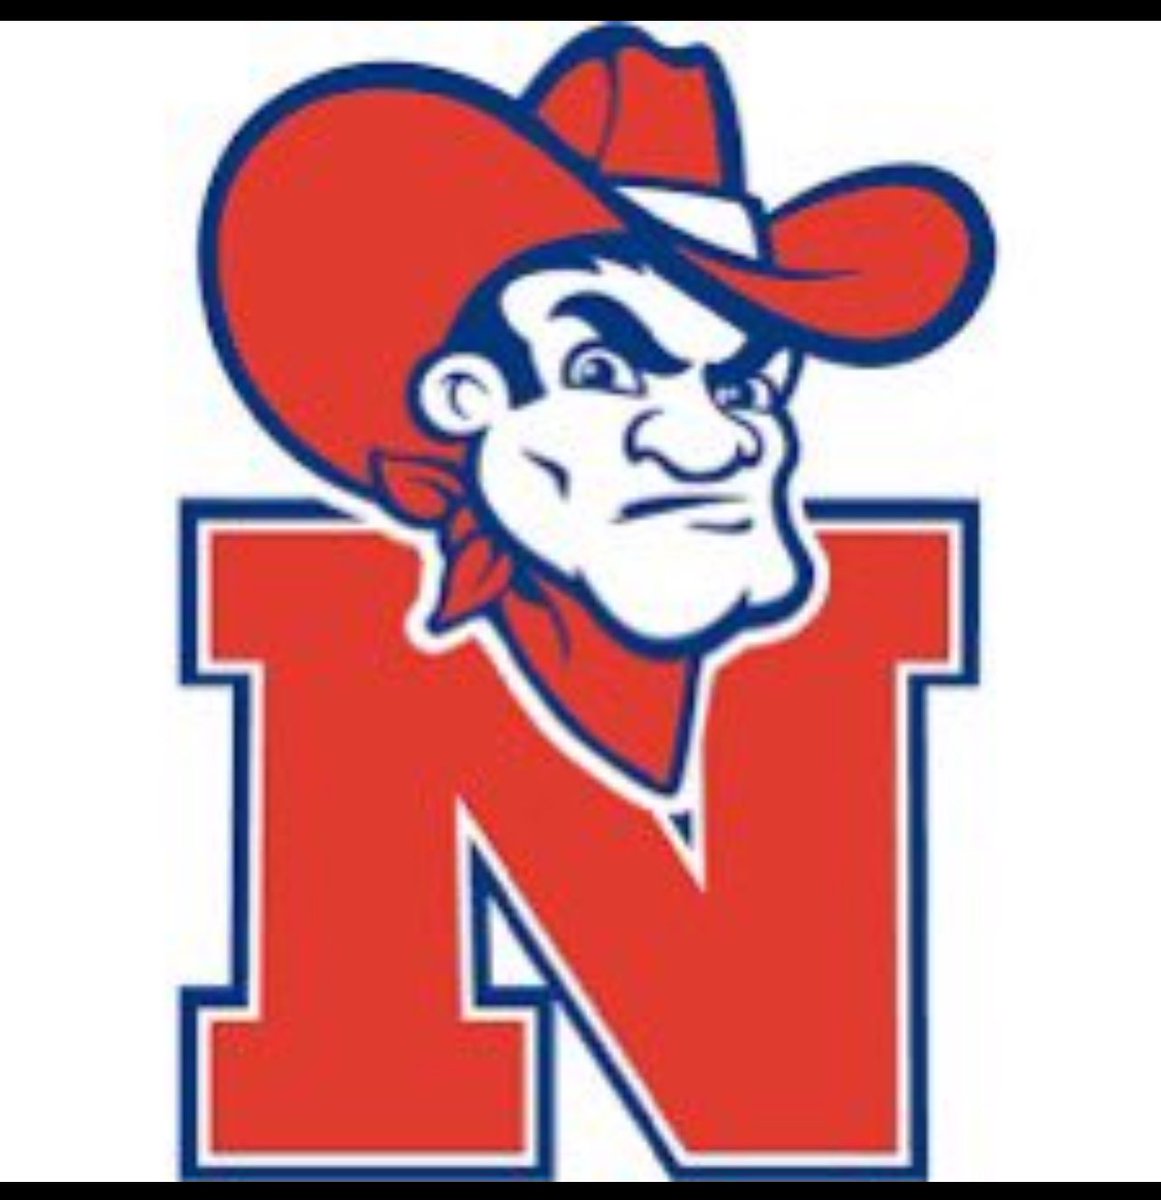 Blessed to receive an offer from @NWCC_Football @stanhill_4 @moore_chris93 @recruitchargers @coachstanr @BooseIssac @chriscutcliffe